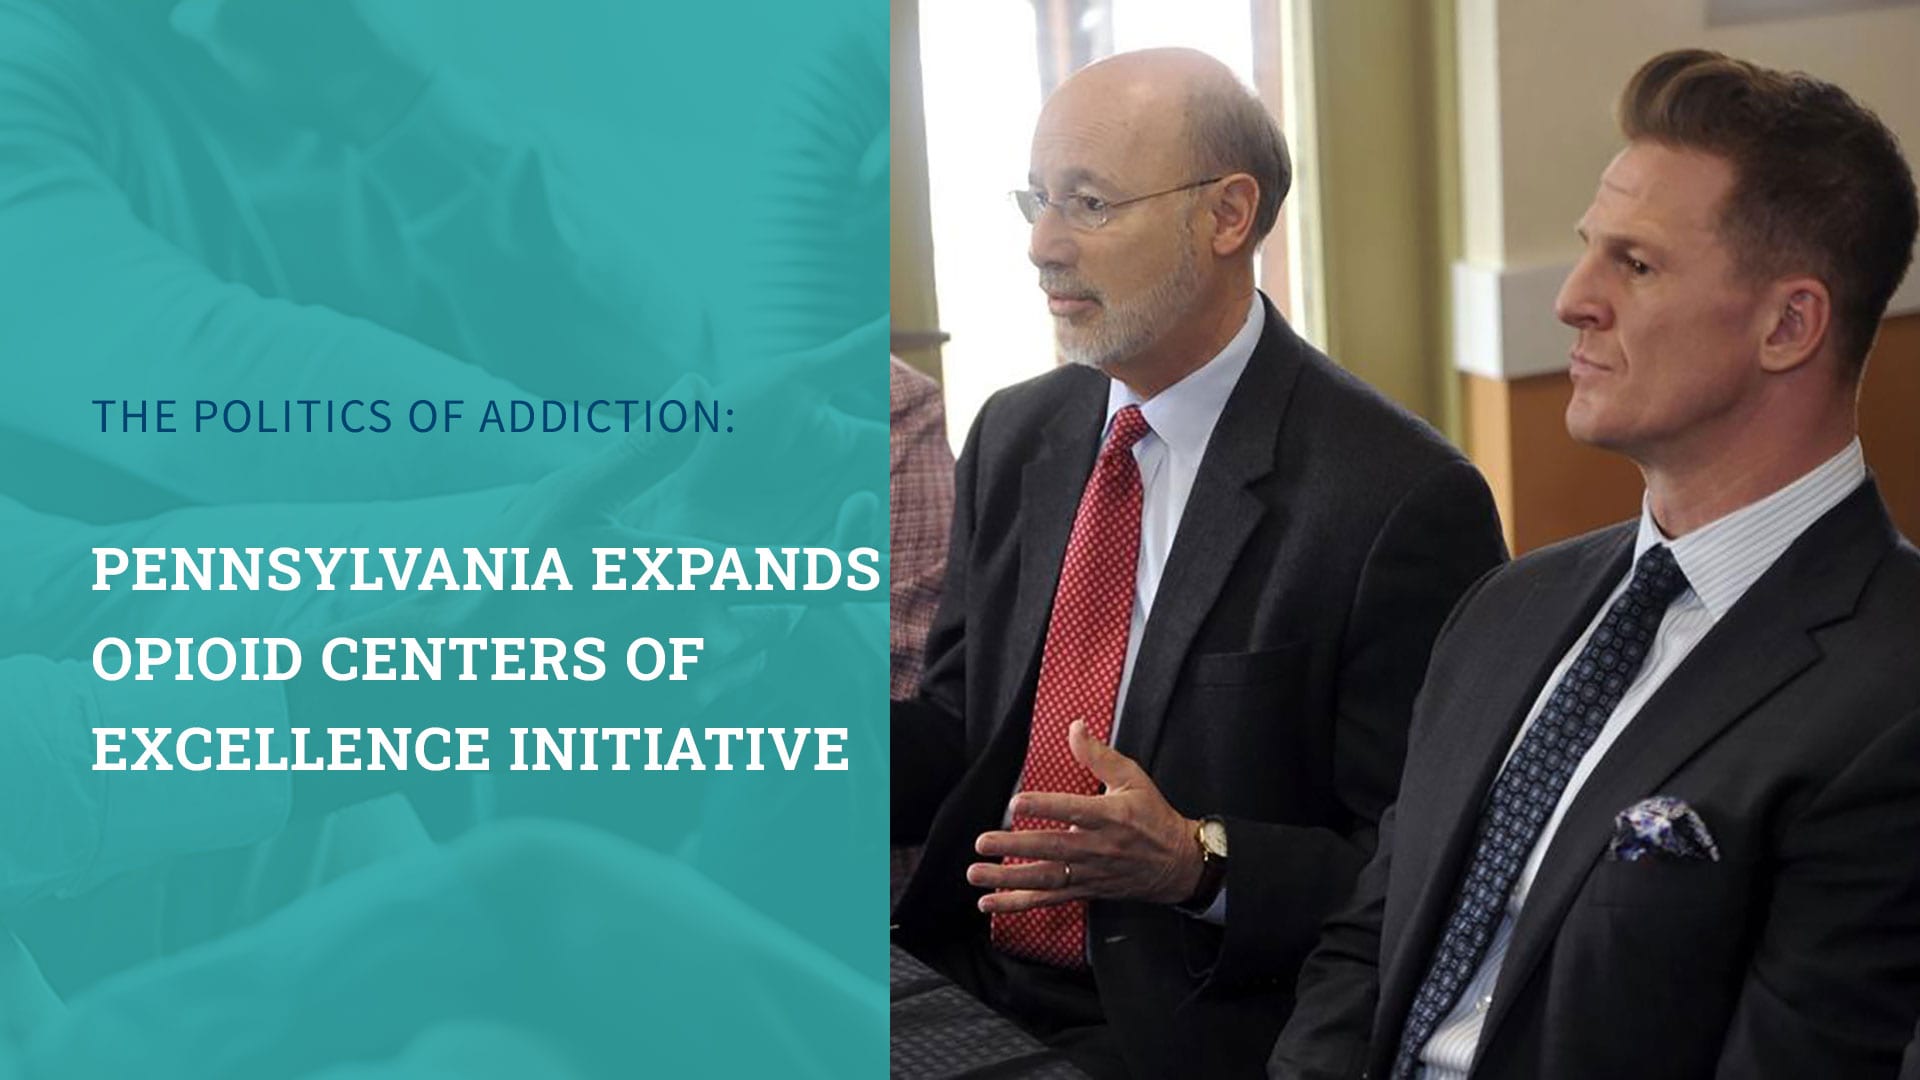 Pennsylvania Expands Opioid Centers of Excellence Initiative